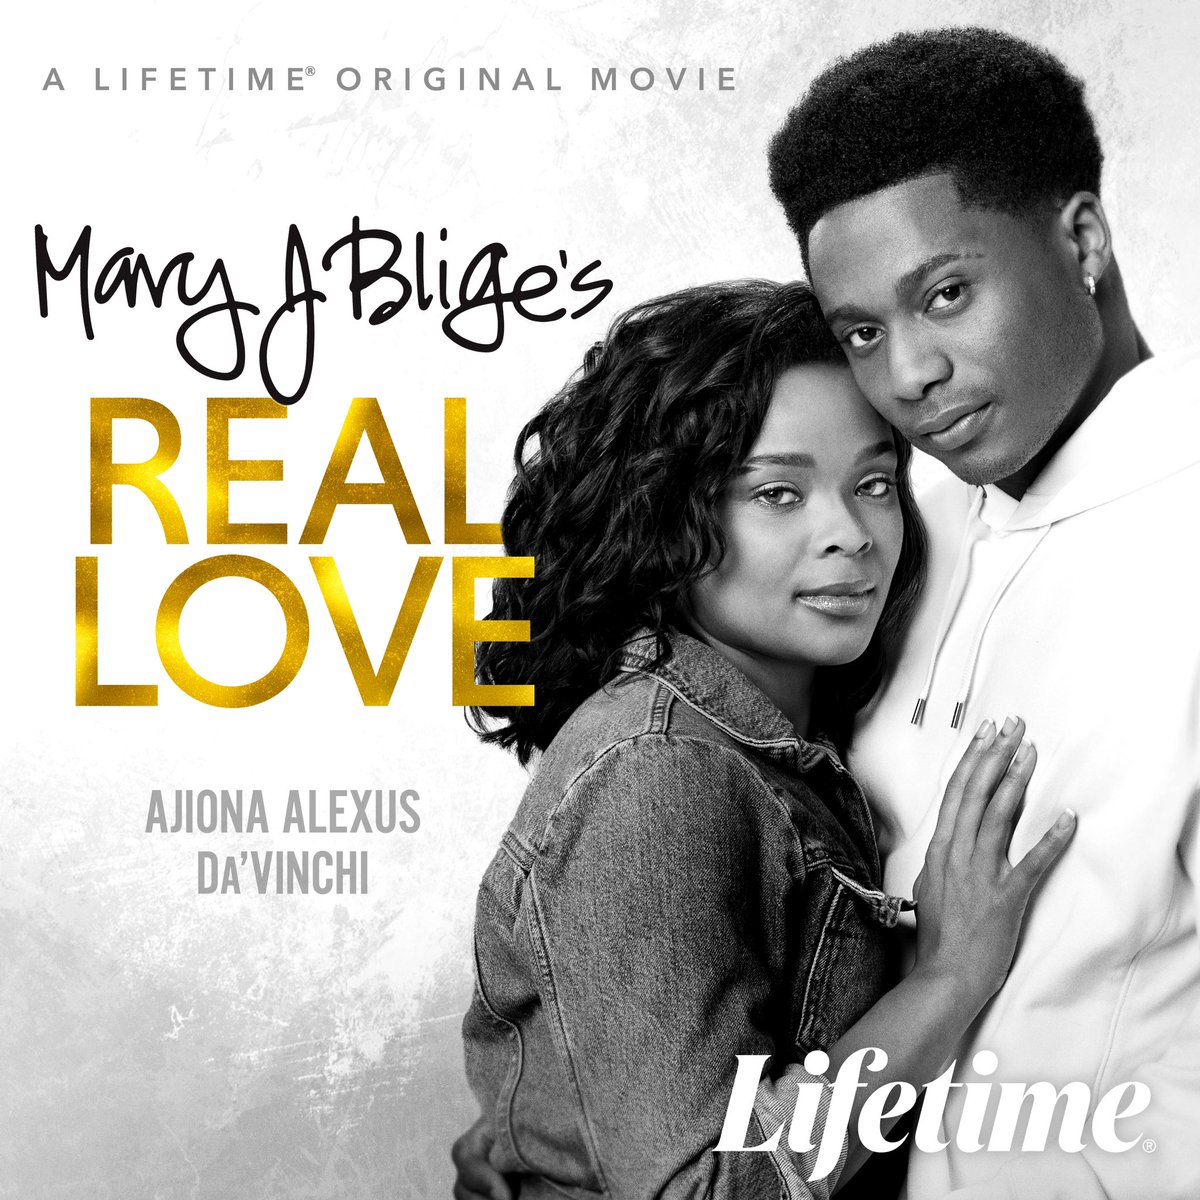 Have you had the chance to watch #RealLove? Let me know all your thoughts! It’s available on the @lifetimetv app!